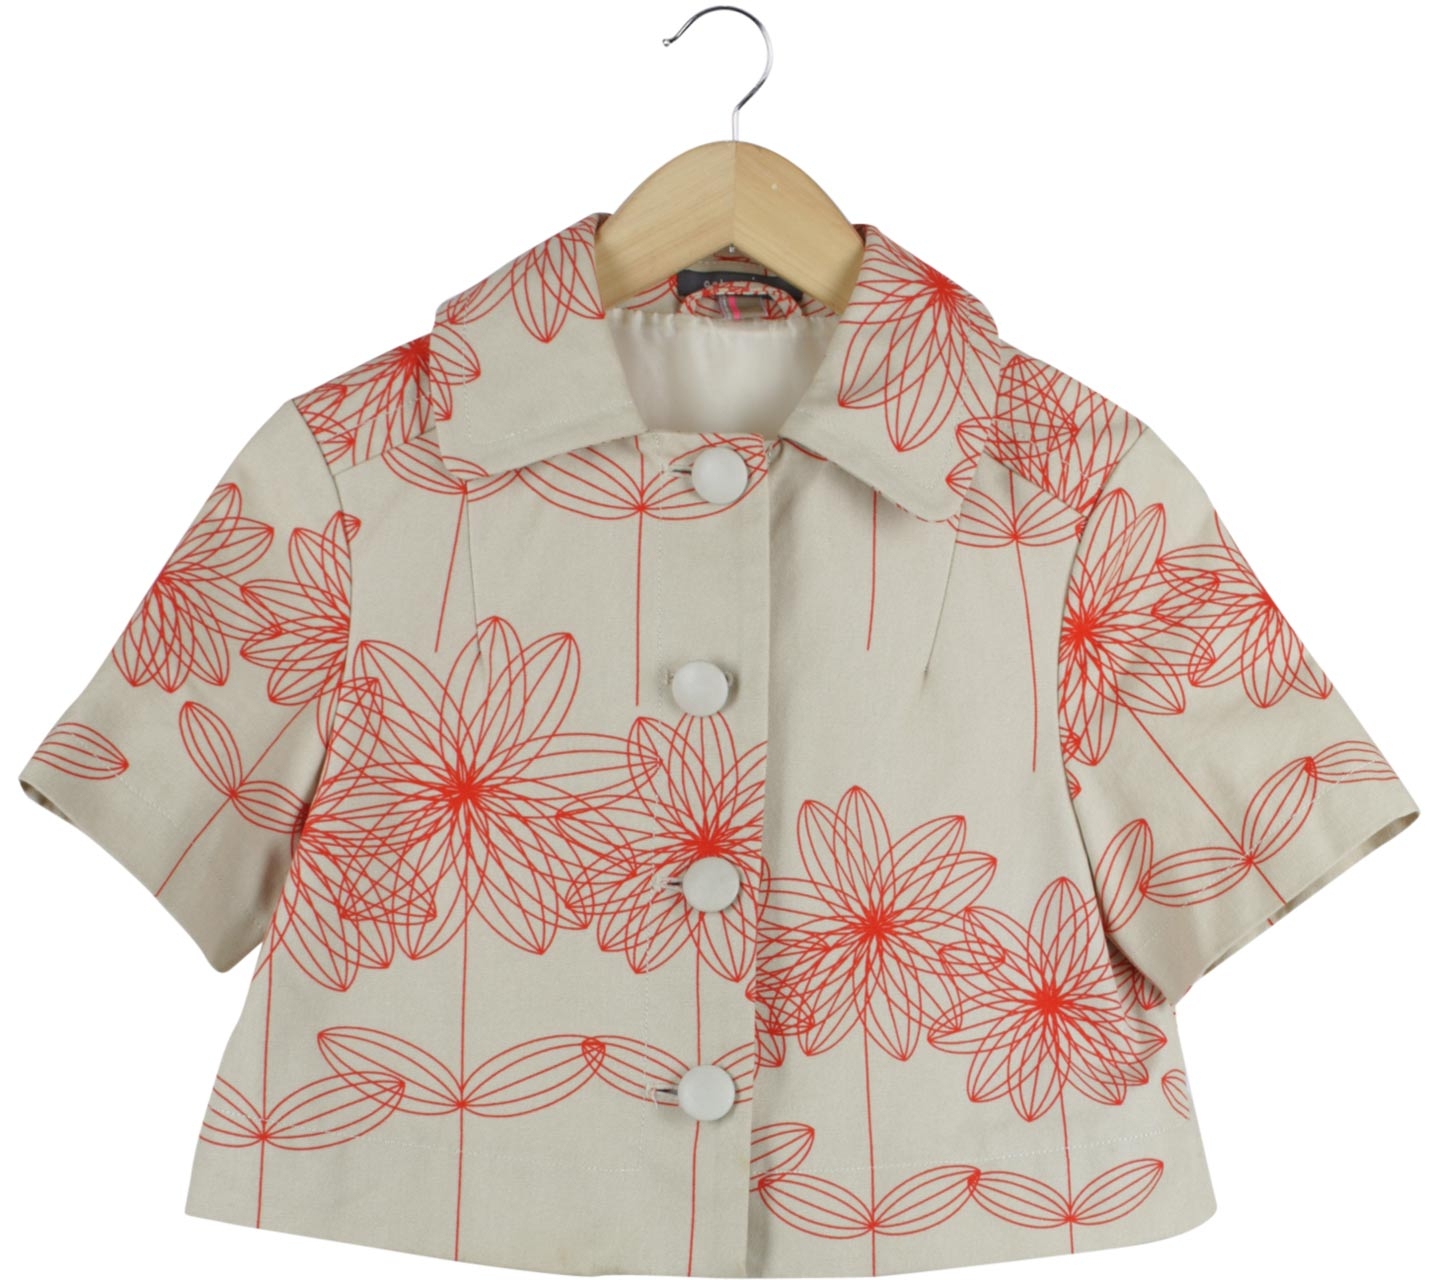 Orla Kiely Cream And Red Floral Outerwear